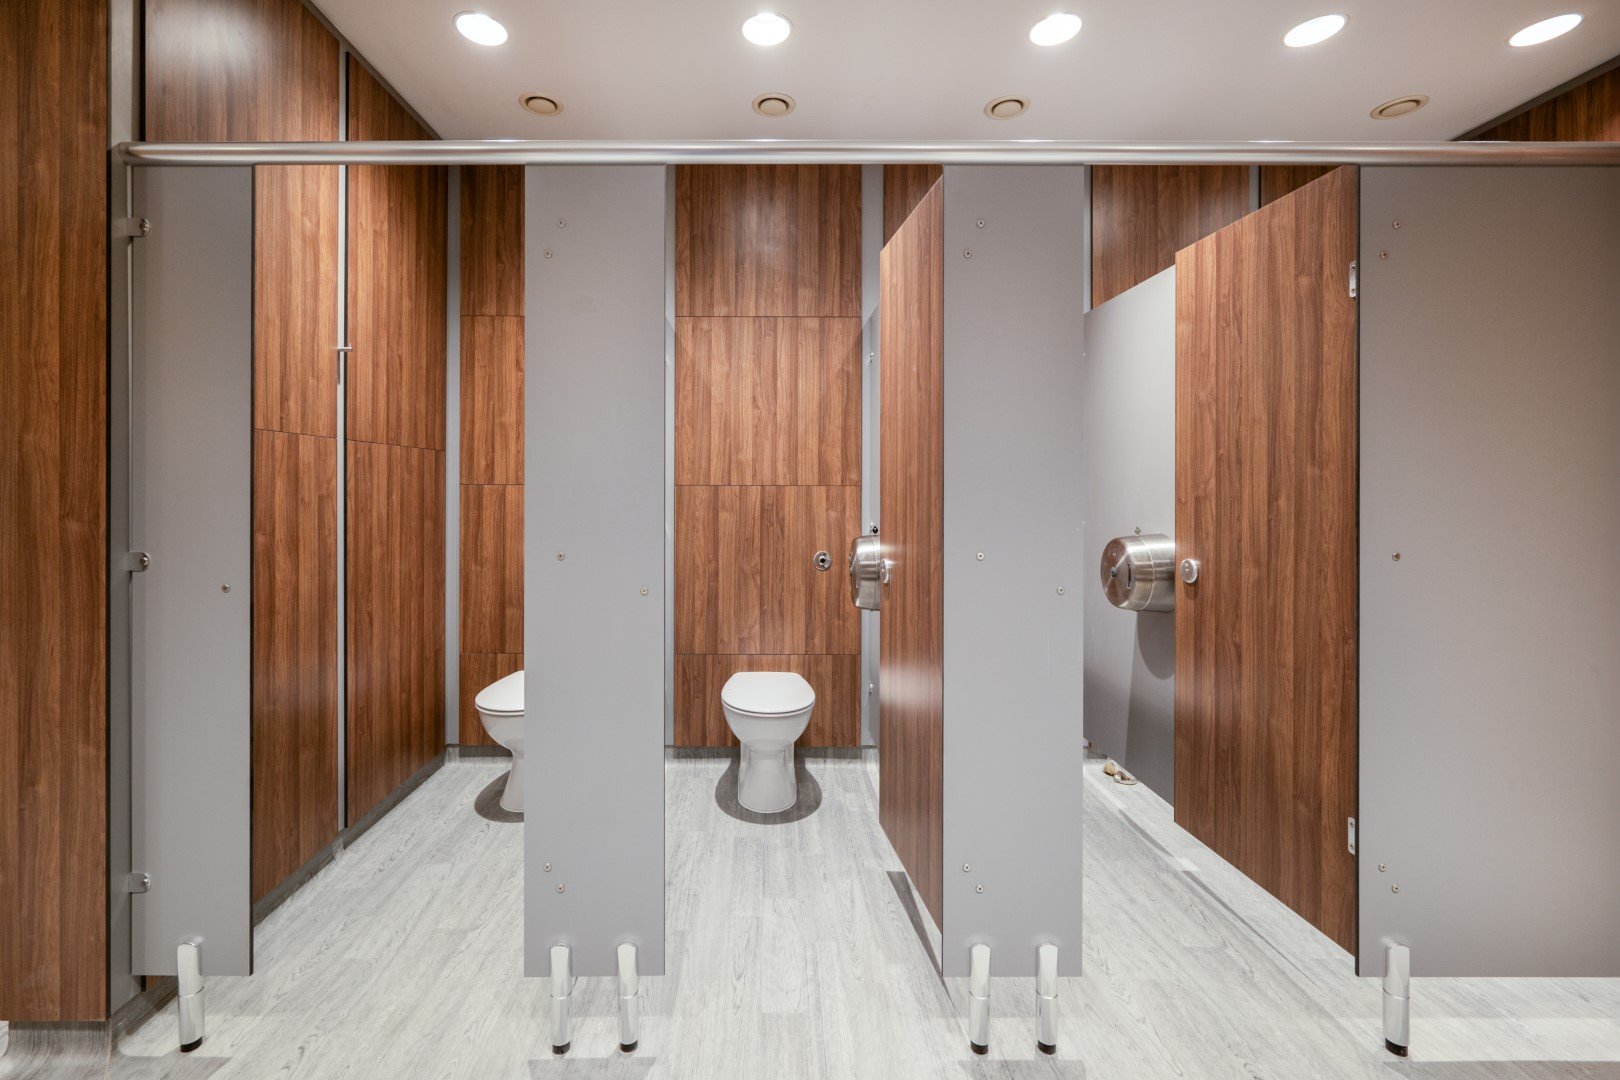  duct panelling and toilet cubicles in a commercial washroom 